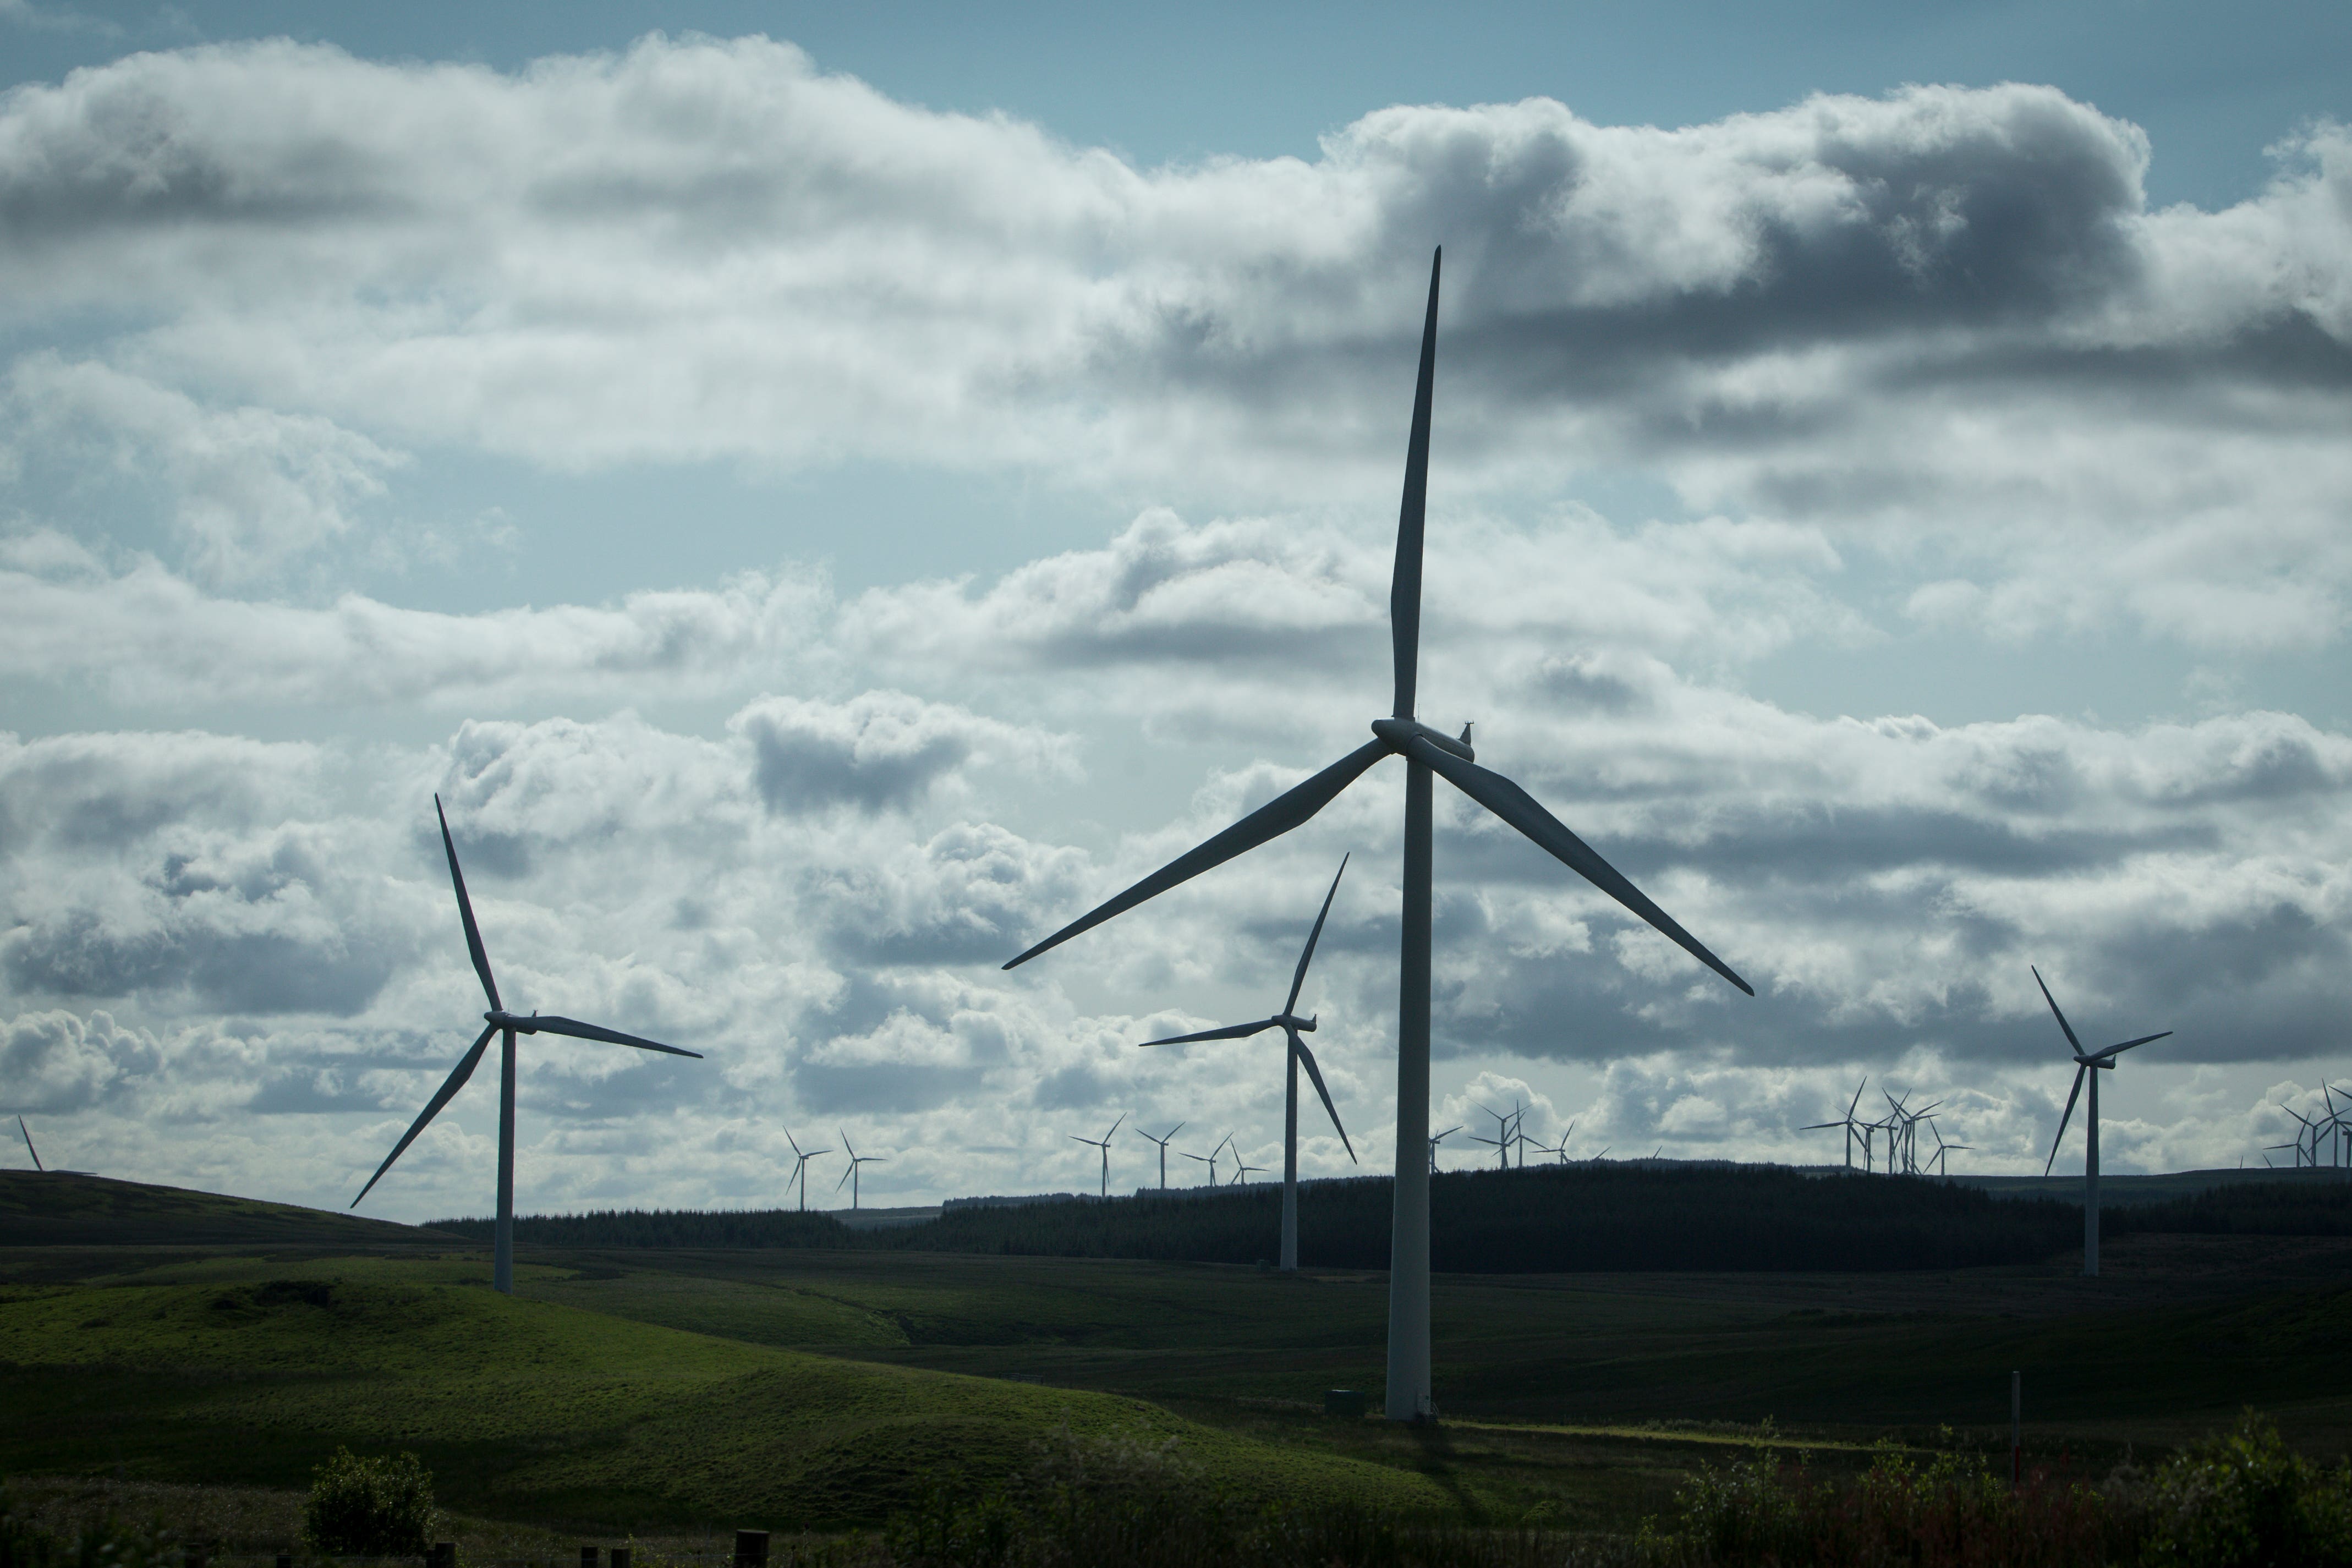 Ofgem said that EDF’s Dorenell Windfarm Limited (DWL) charged ‘excessive prices’